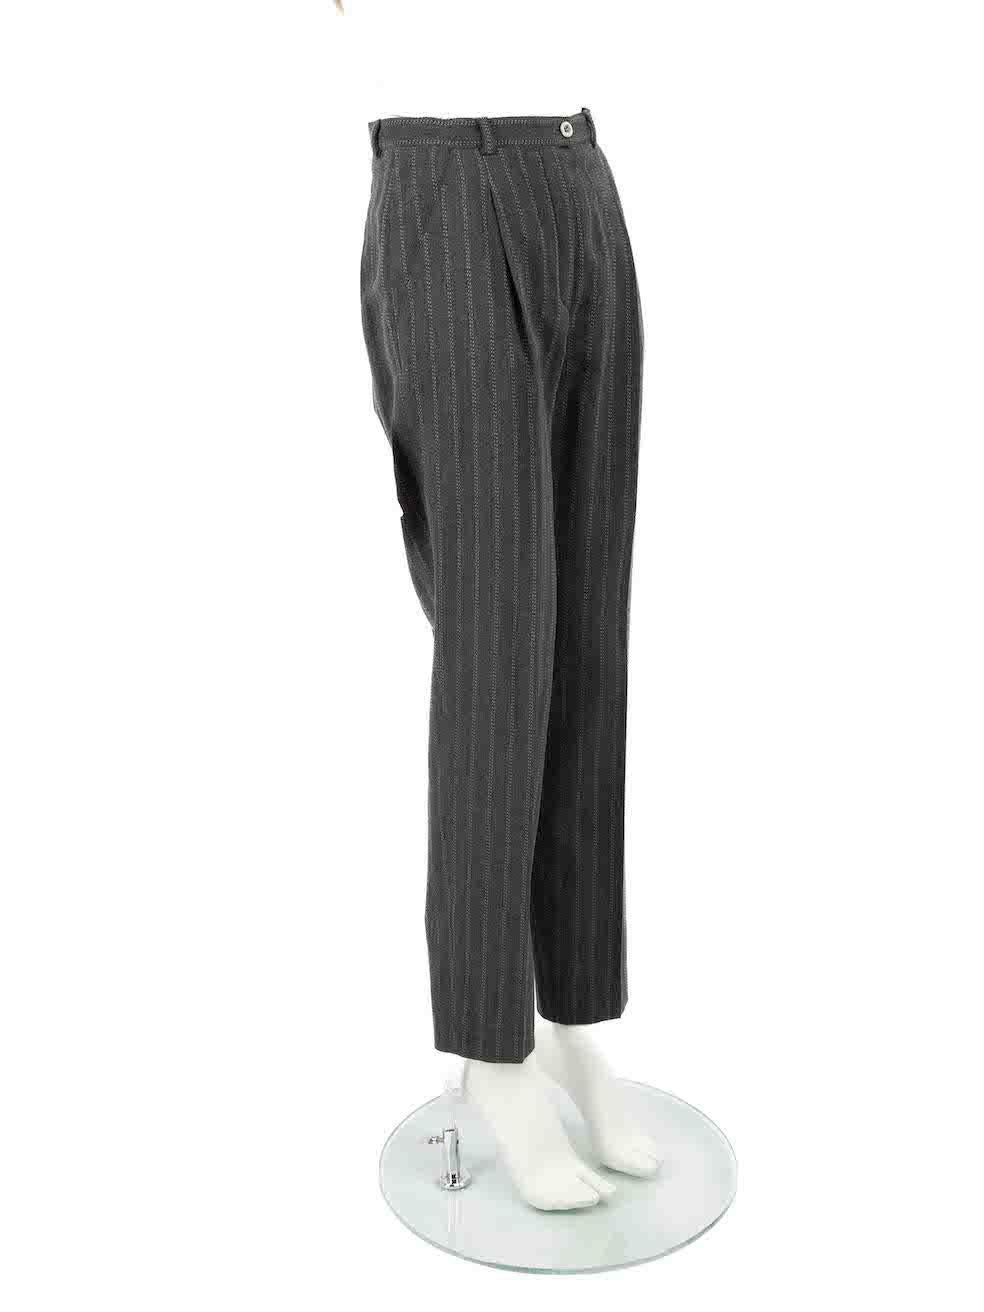 CONDITION is Very good. Hardly any visible wear to trousers is evident on this used Escada designer resale item.
 
 
 
 Details
 
 
 Grey
 
 Wool
 
 Trousers
 
 Striped pattern
 
 Slim fit
 
 High rise
 
 2x Side pockets
 
 Fly zip and button